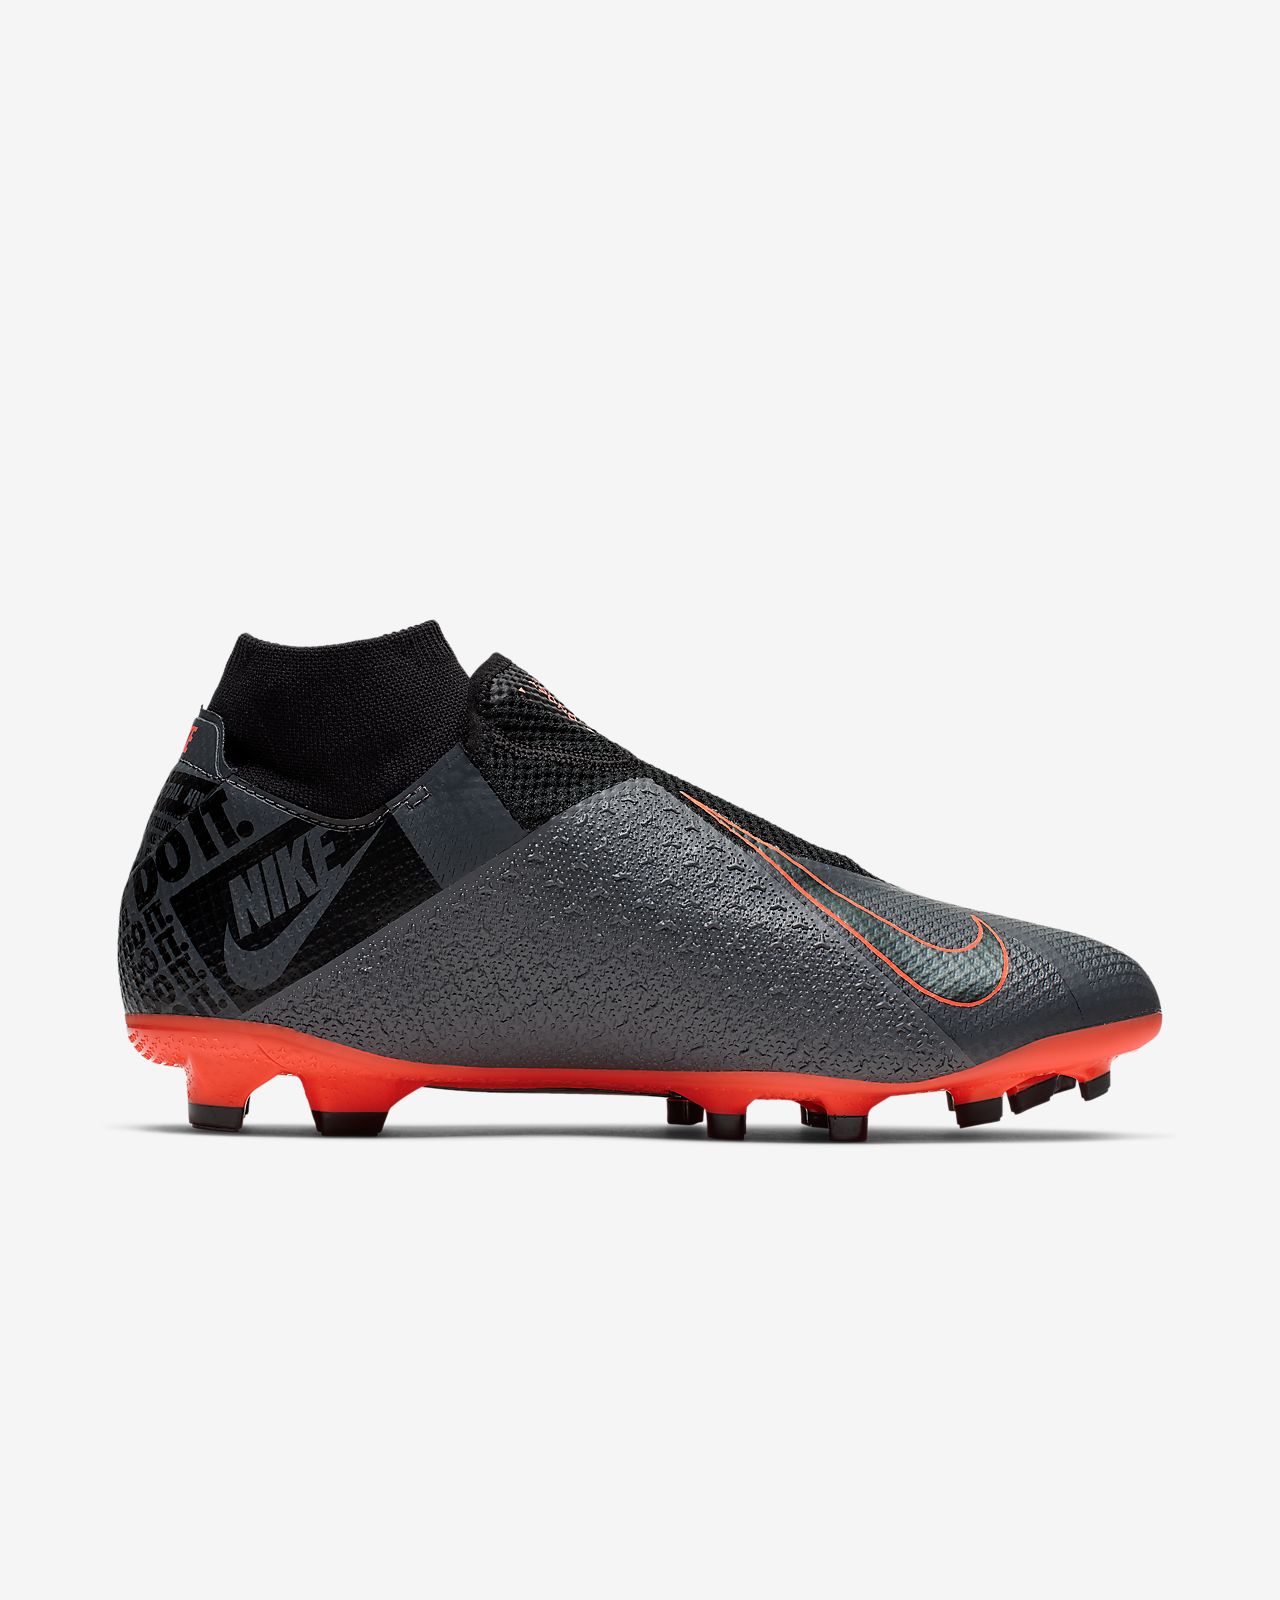 Nike Phantom Vision Pro Dynamic Fit Fg Firm Ground Soccer Cleat